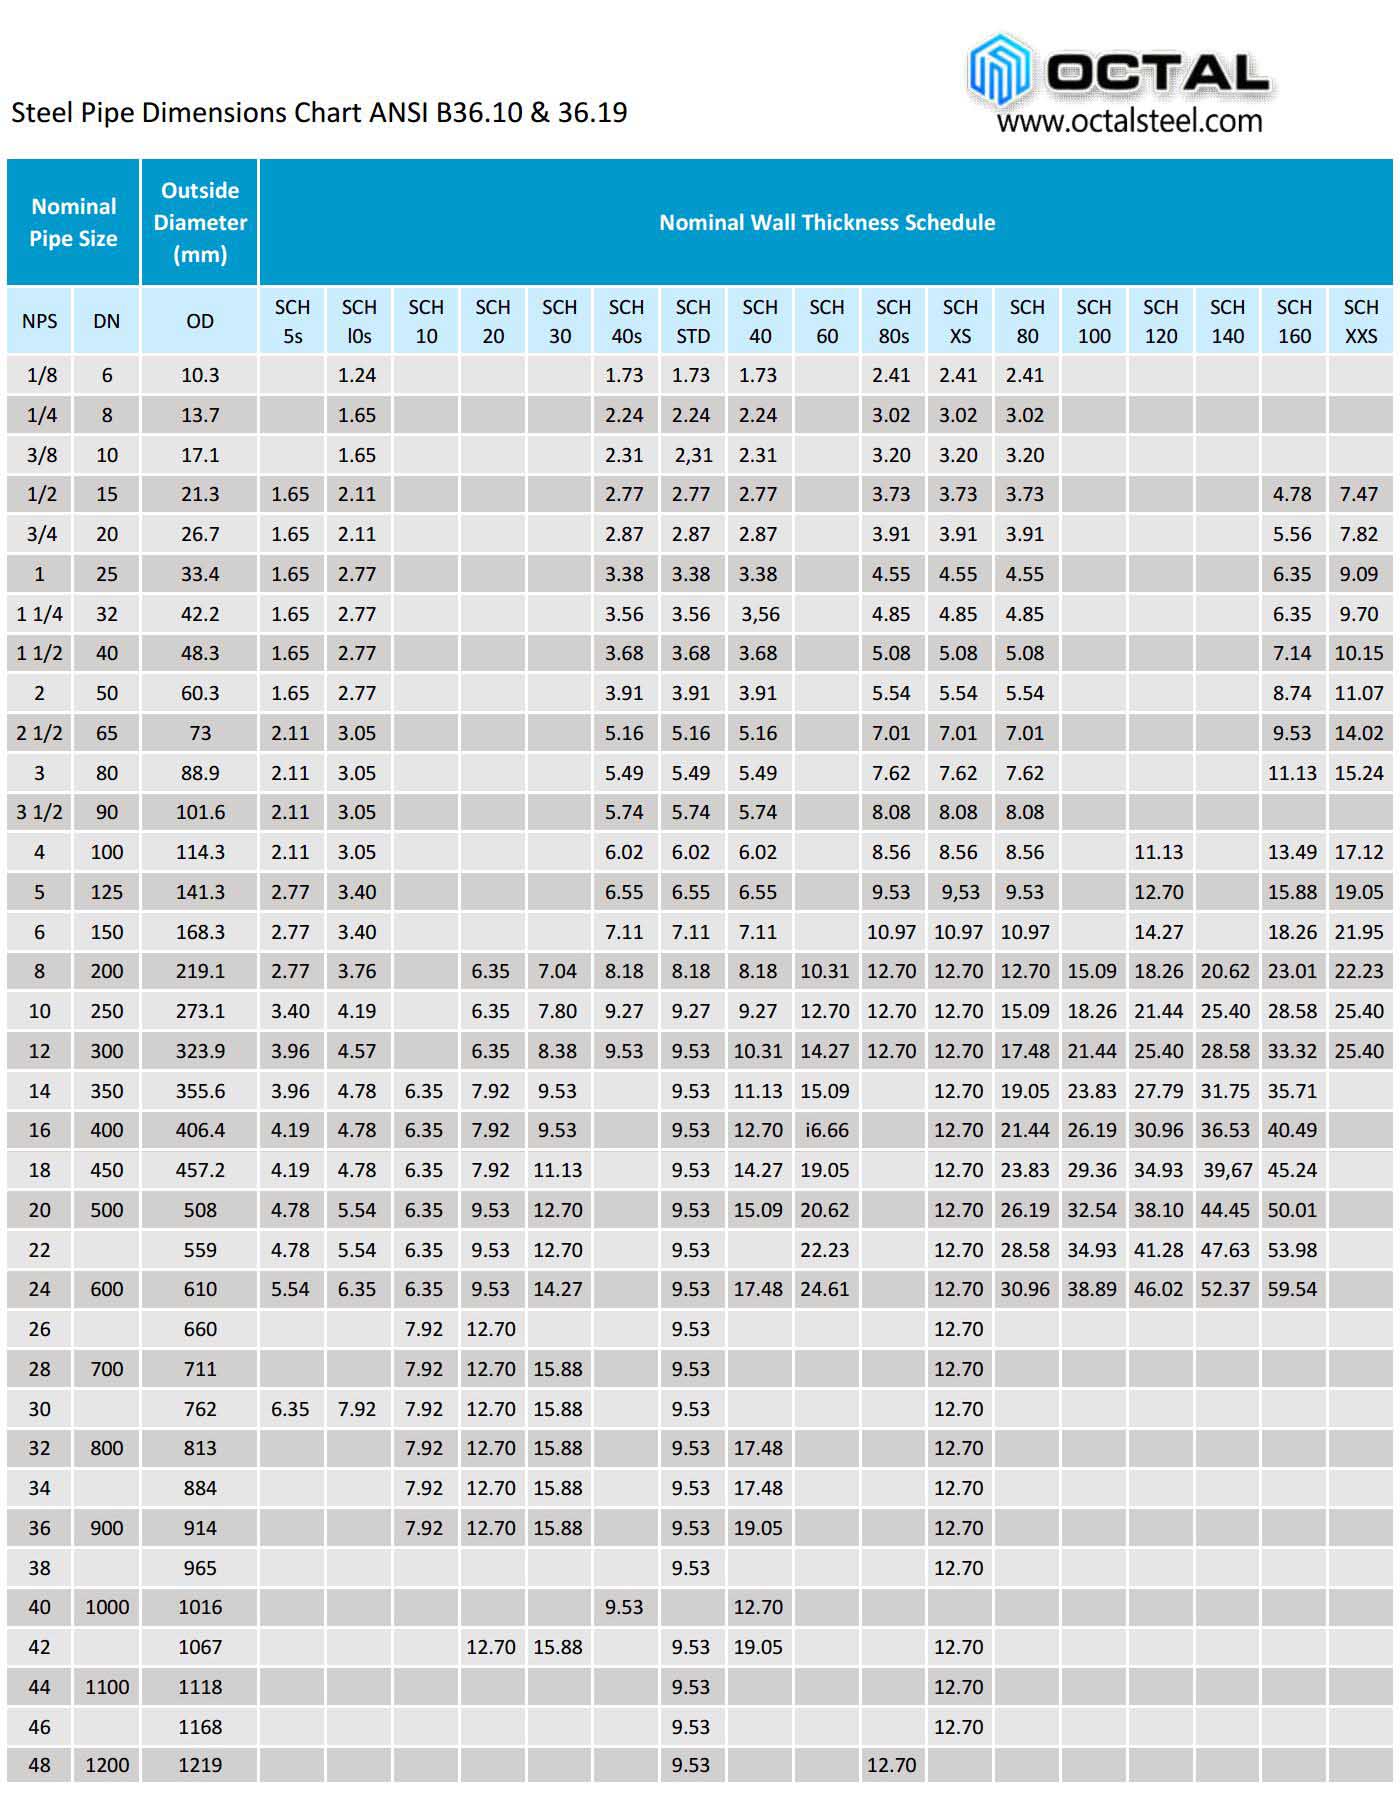 Steel Pipe Dimensions Chart Ansi B36.10 And B36.19 